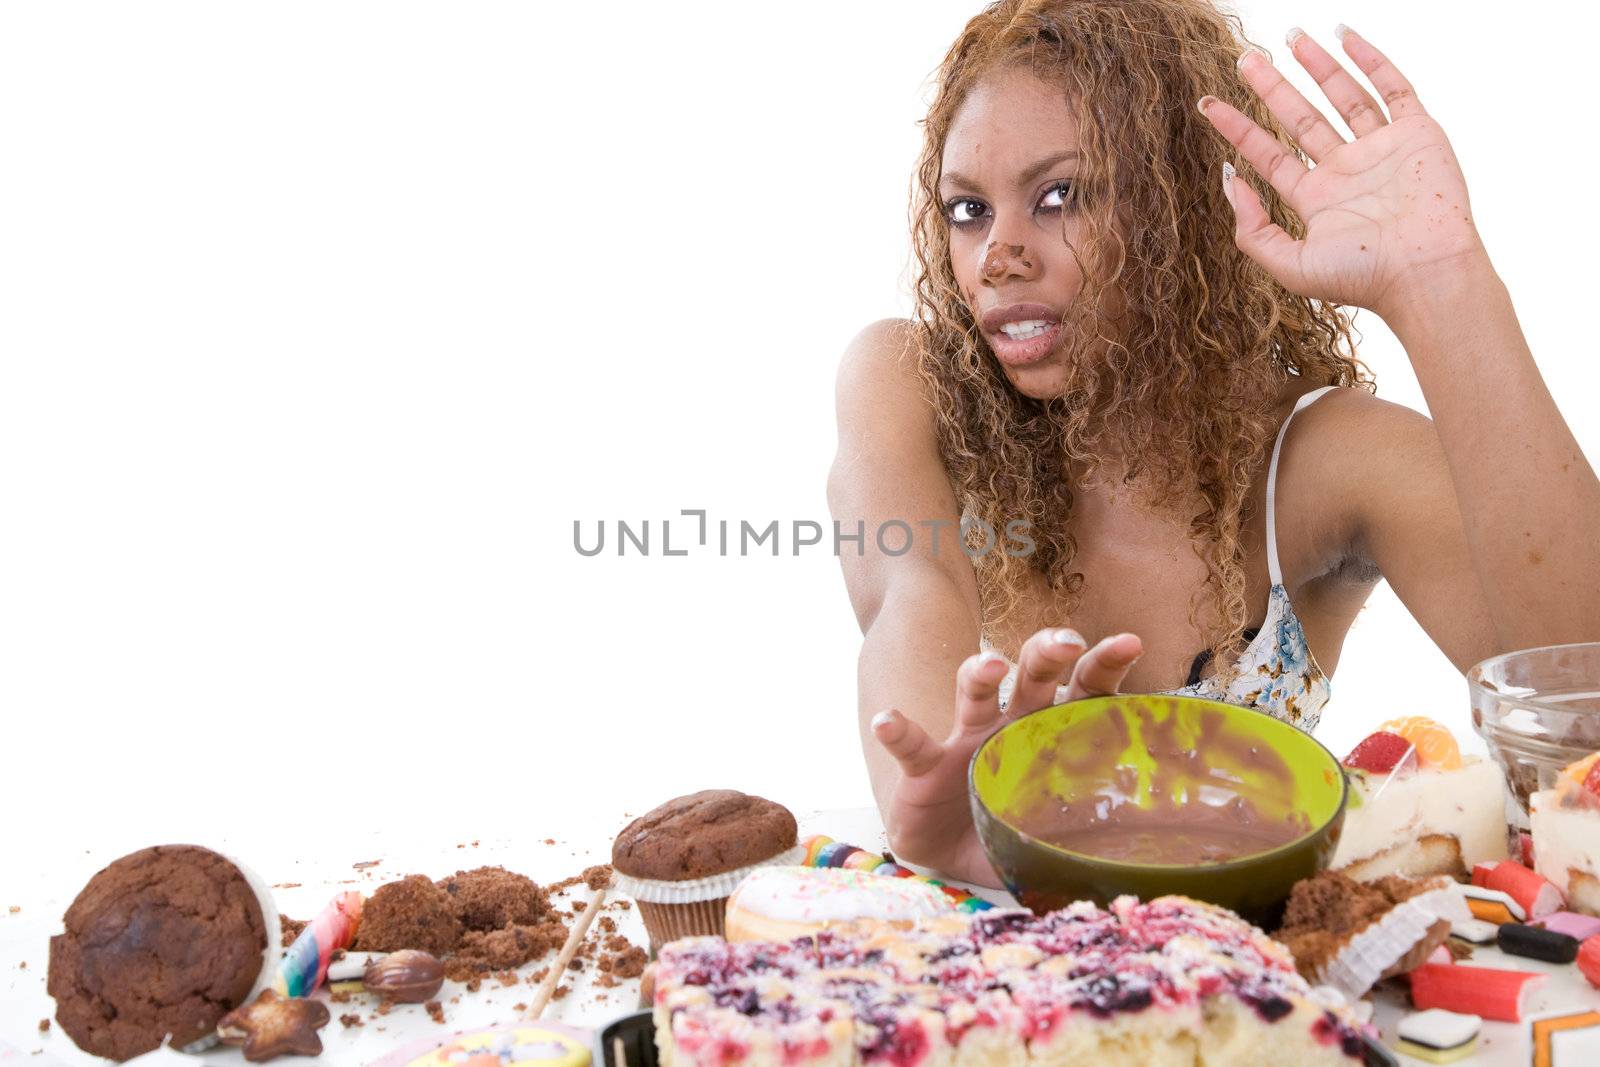 Pretty black girl pushing away the bowl of chocolate she has just been eating